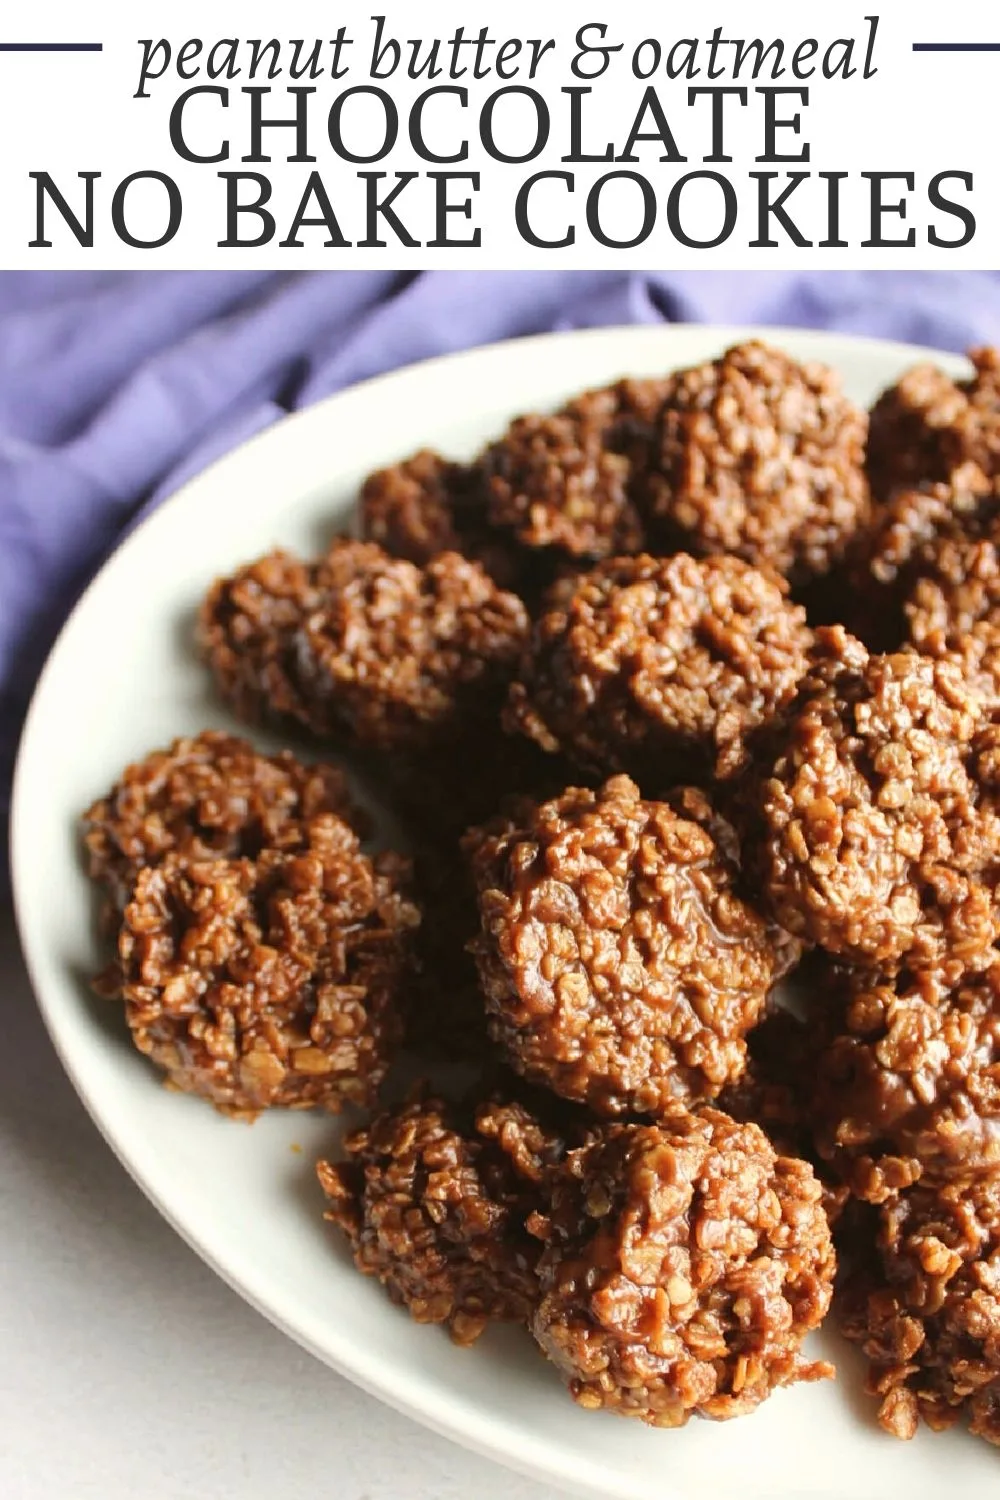 Chocolate no bake cookies are loaded with peanut butter, and oatmeal. They only take a few minutes to make and they taste amazing. They are the perfect quick dessert when you don't feel like turning on the oven.